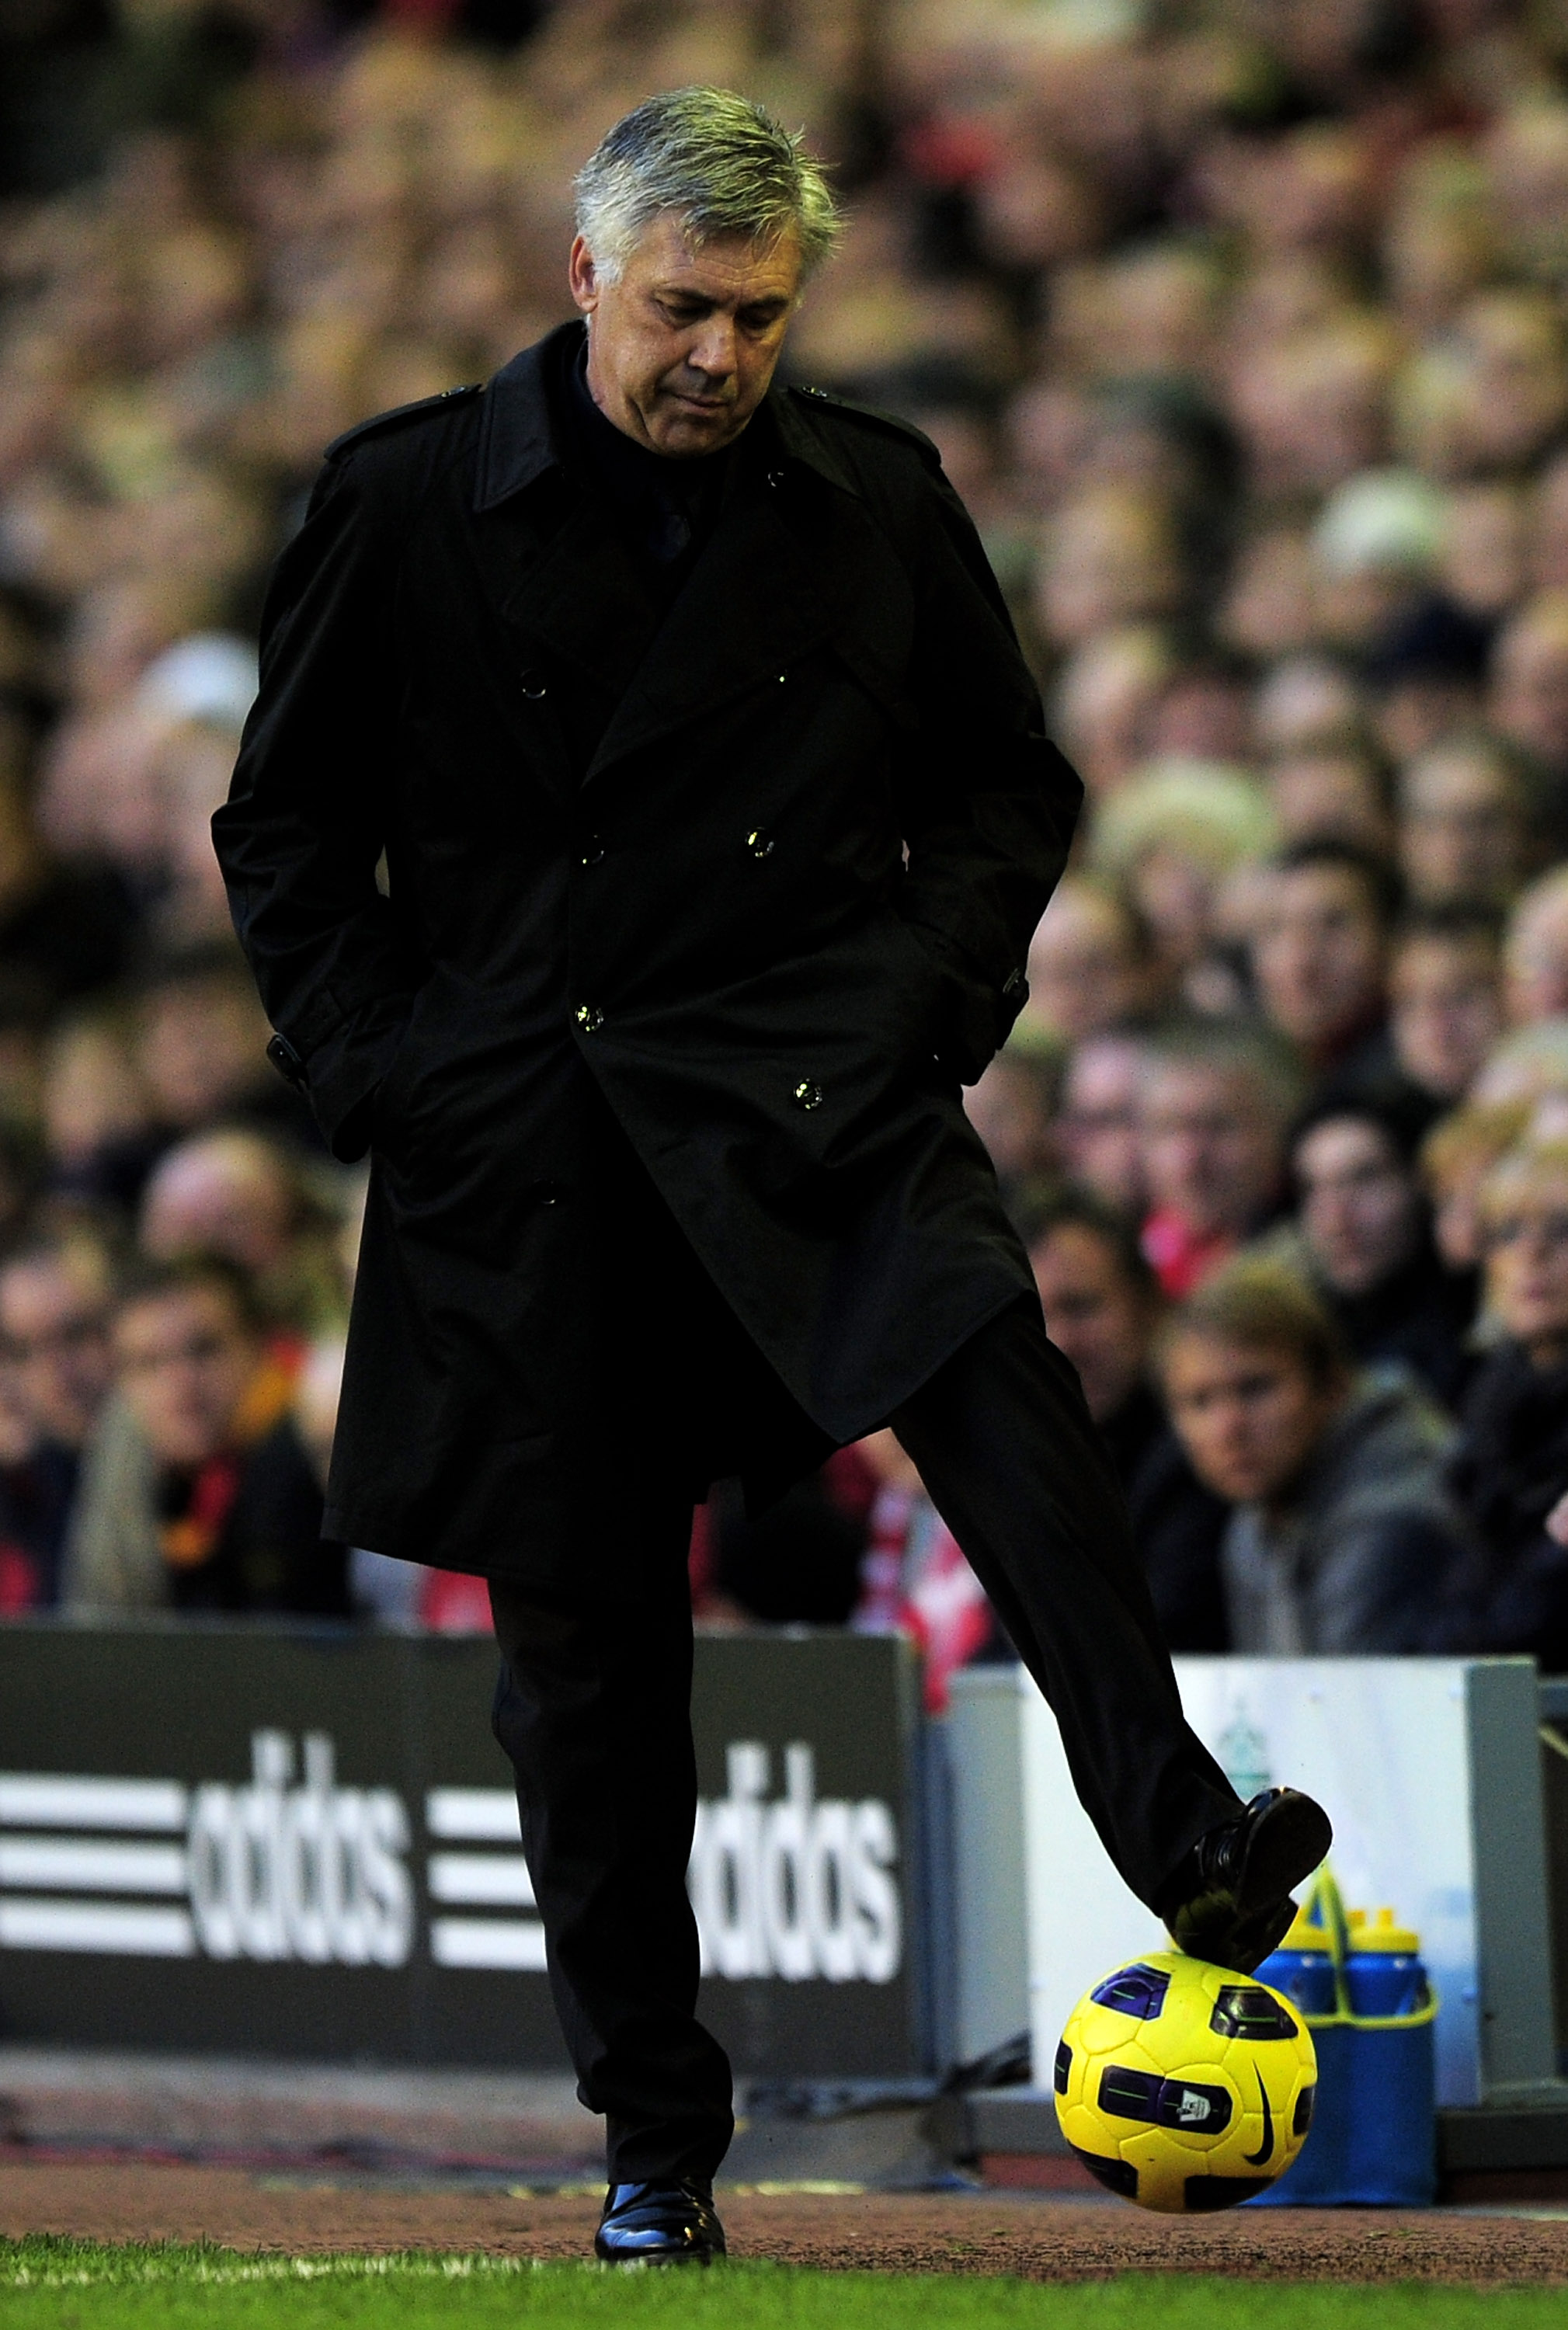 LIVERPOOL, ENGLAND - NOVEMBER 07:   Chelsea Manager Carlo Ancelotti controls the ball during the Barclays Premier League match between Liverpool and Chelsea at Anfield on November 7, 2010 in Liverpool, England. (Photo by Shaun Botterill/Getty Images)